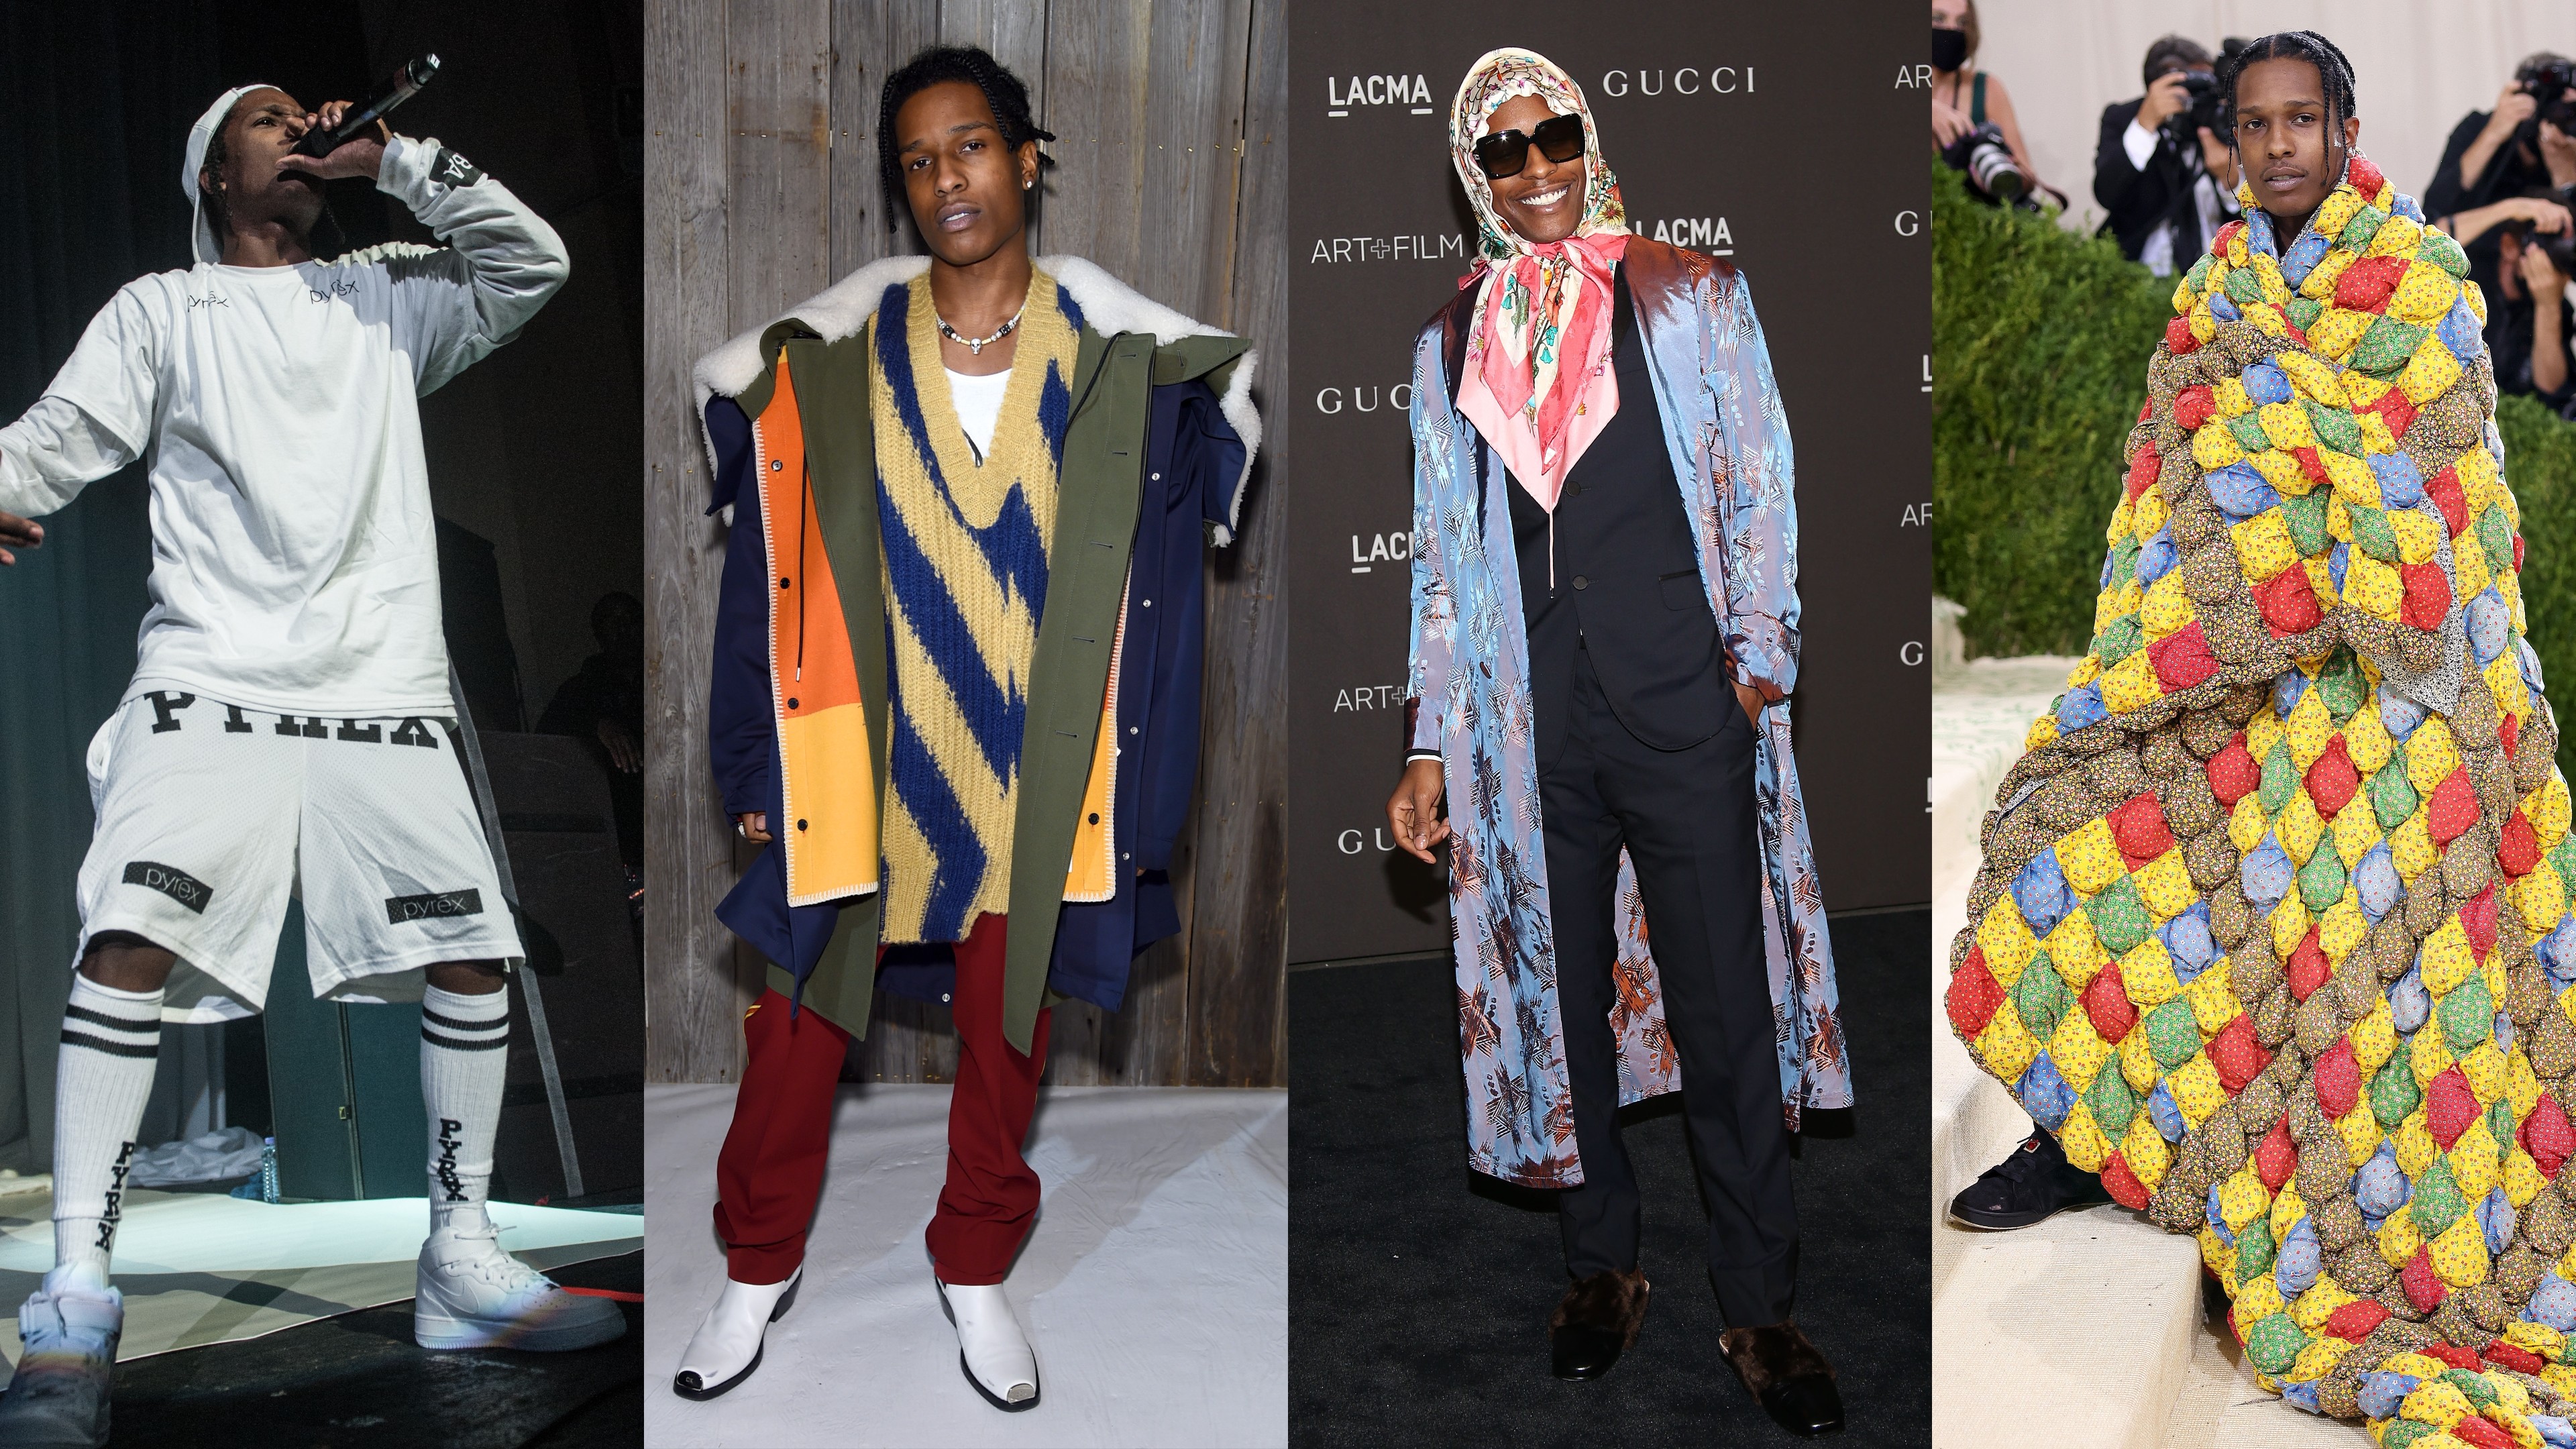 ASAP ROCKY'S OUTFITS on Tumblr